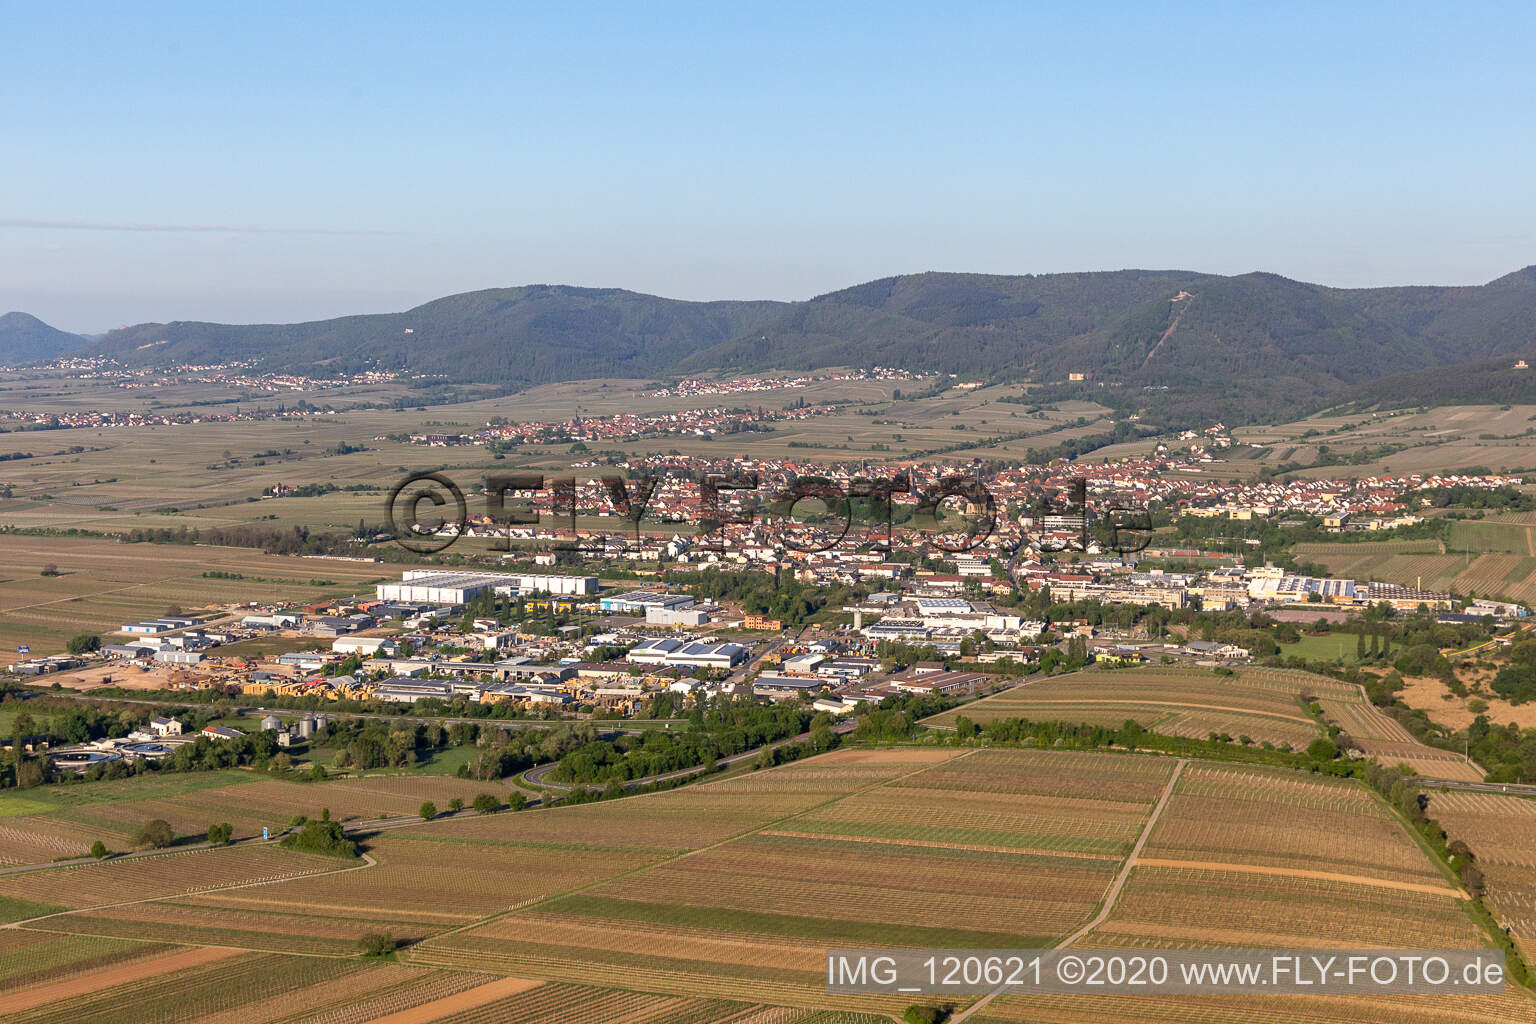 Drone image of Edenkoben in the state Rhineland-Palatinate, Germany